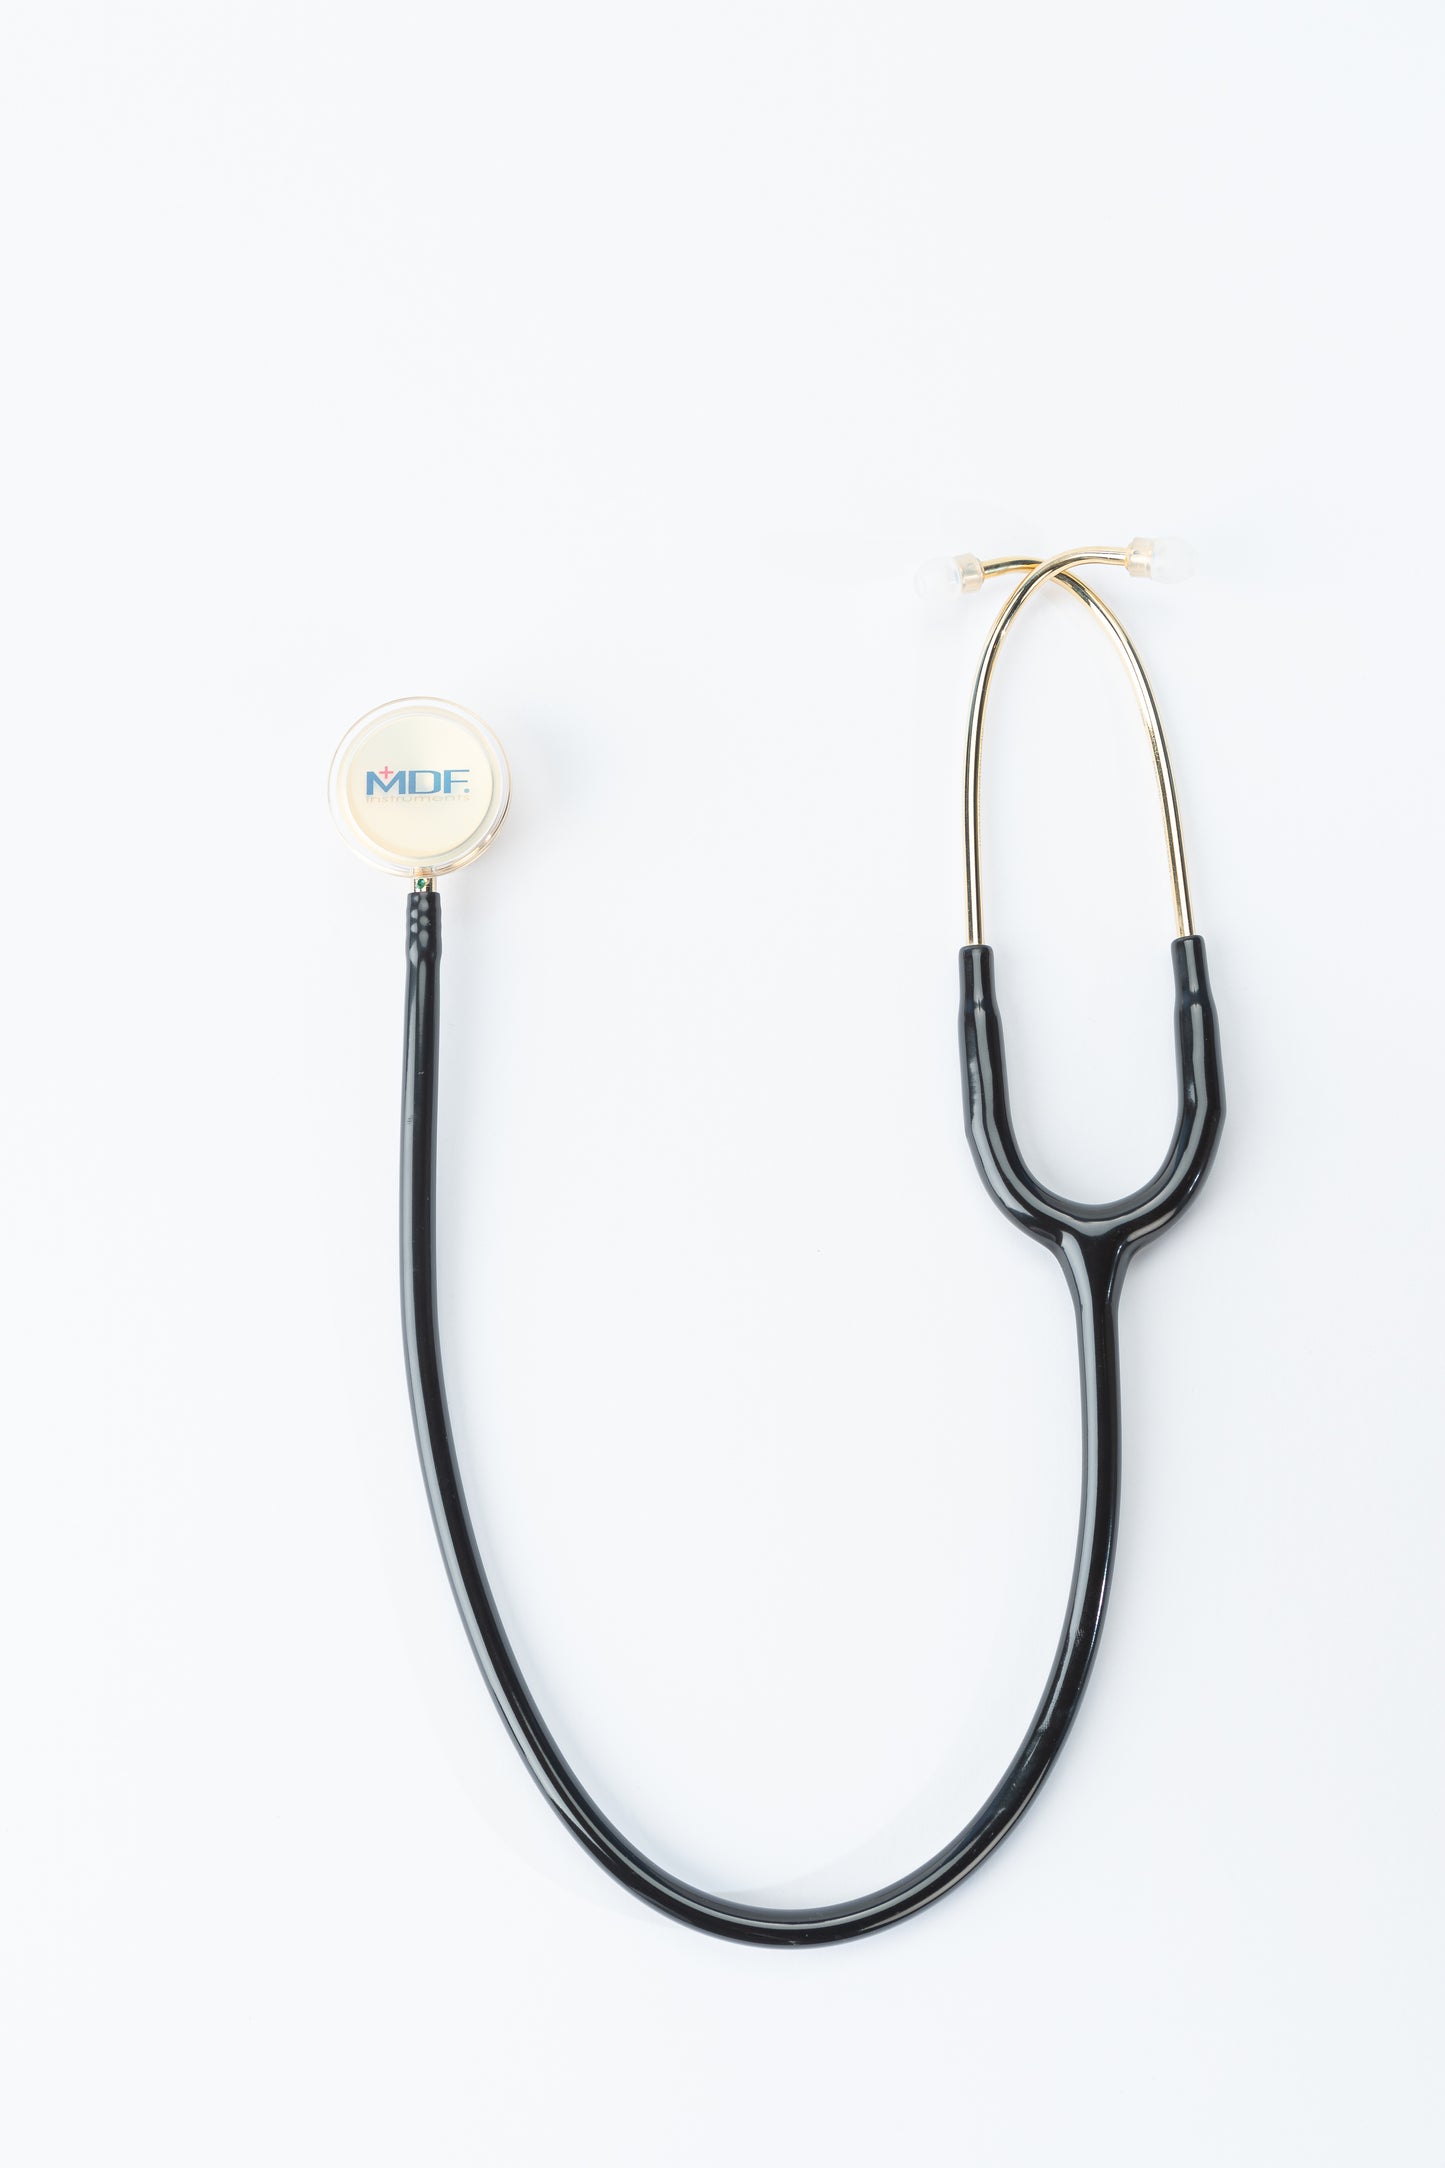 MD One® Adult Stethoscope - Black/Gold